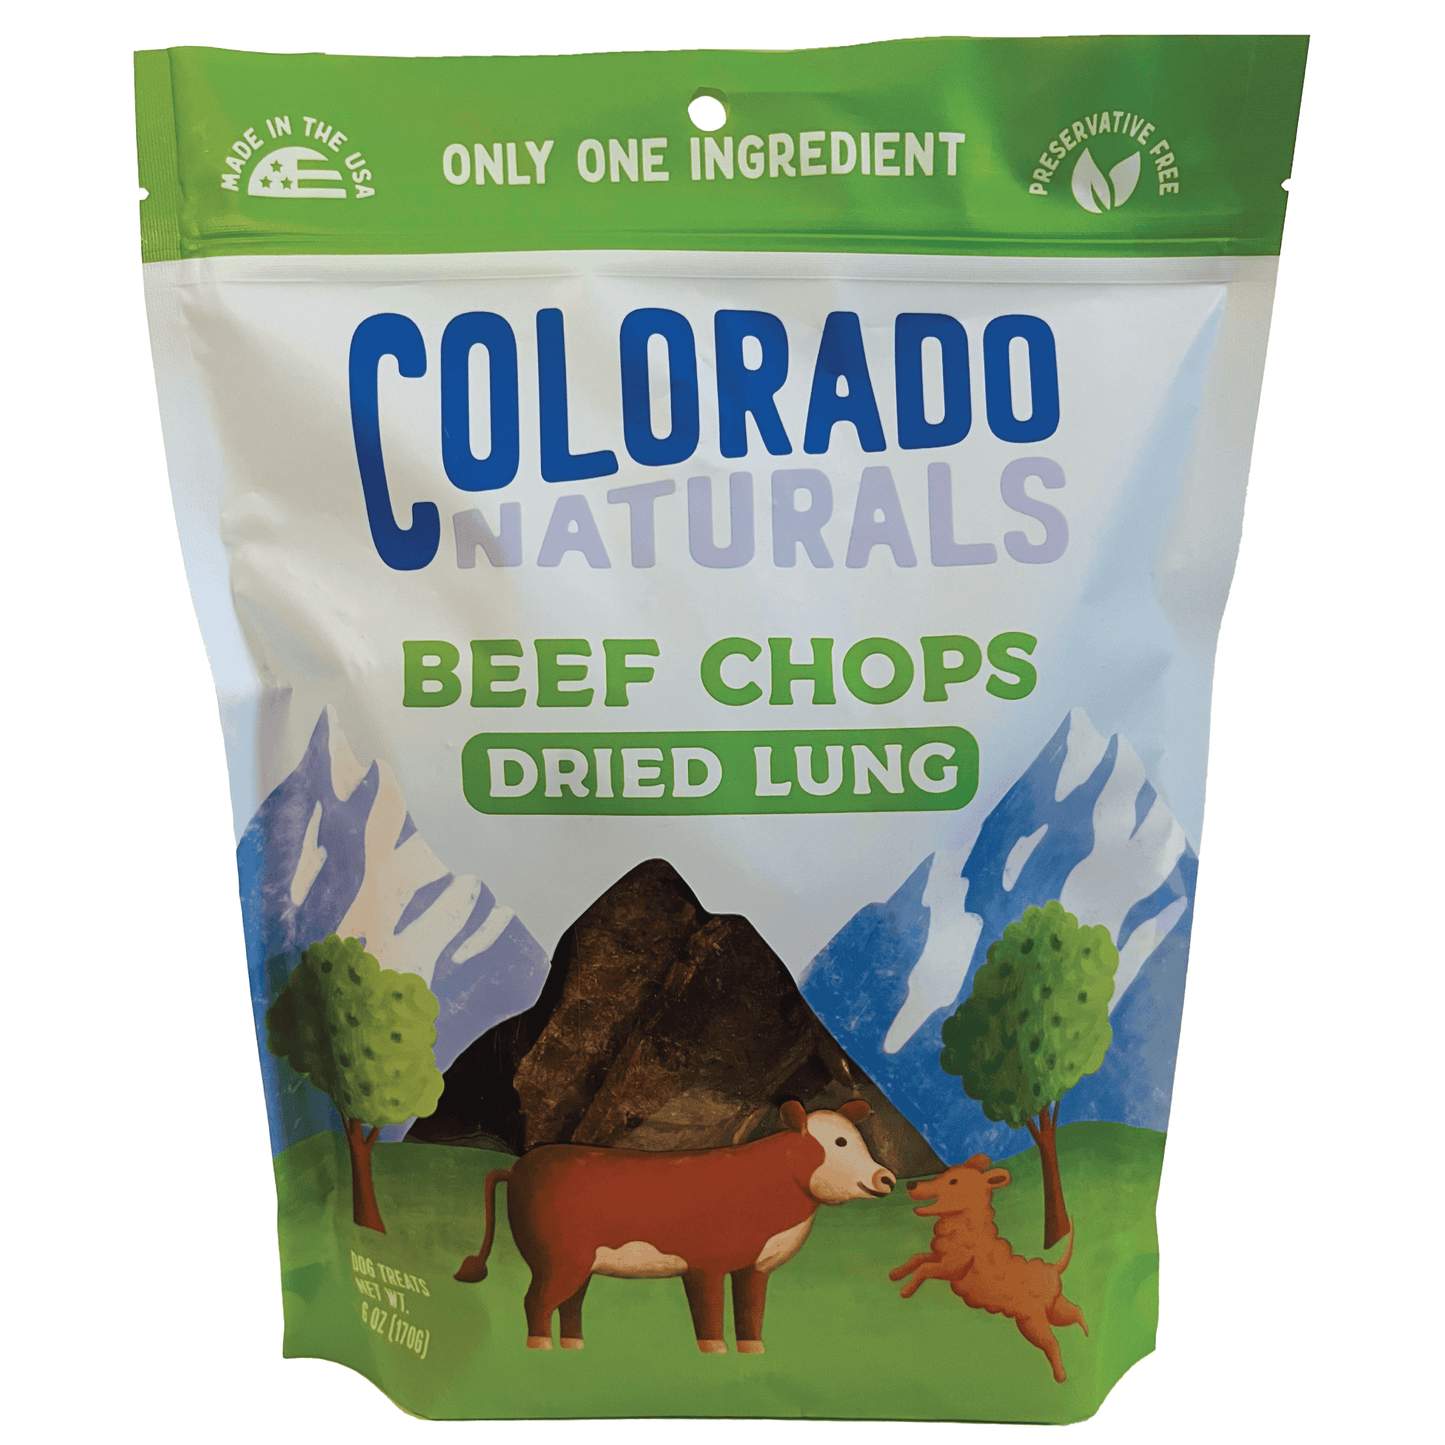 Colorado Naturals Dried Lung Beef Chop